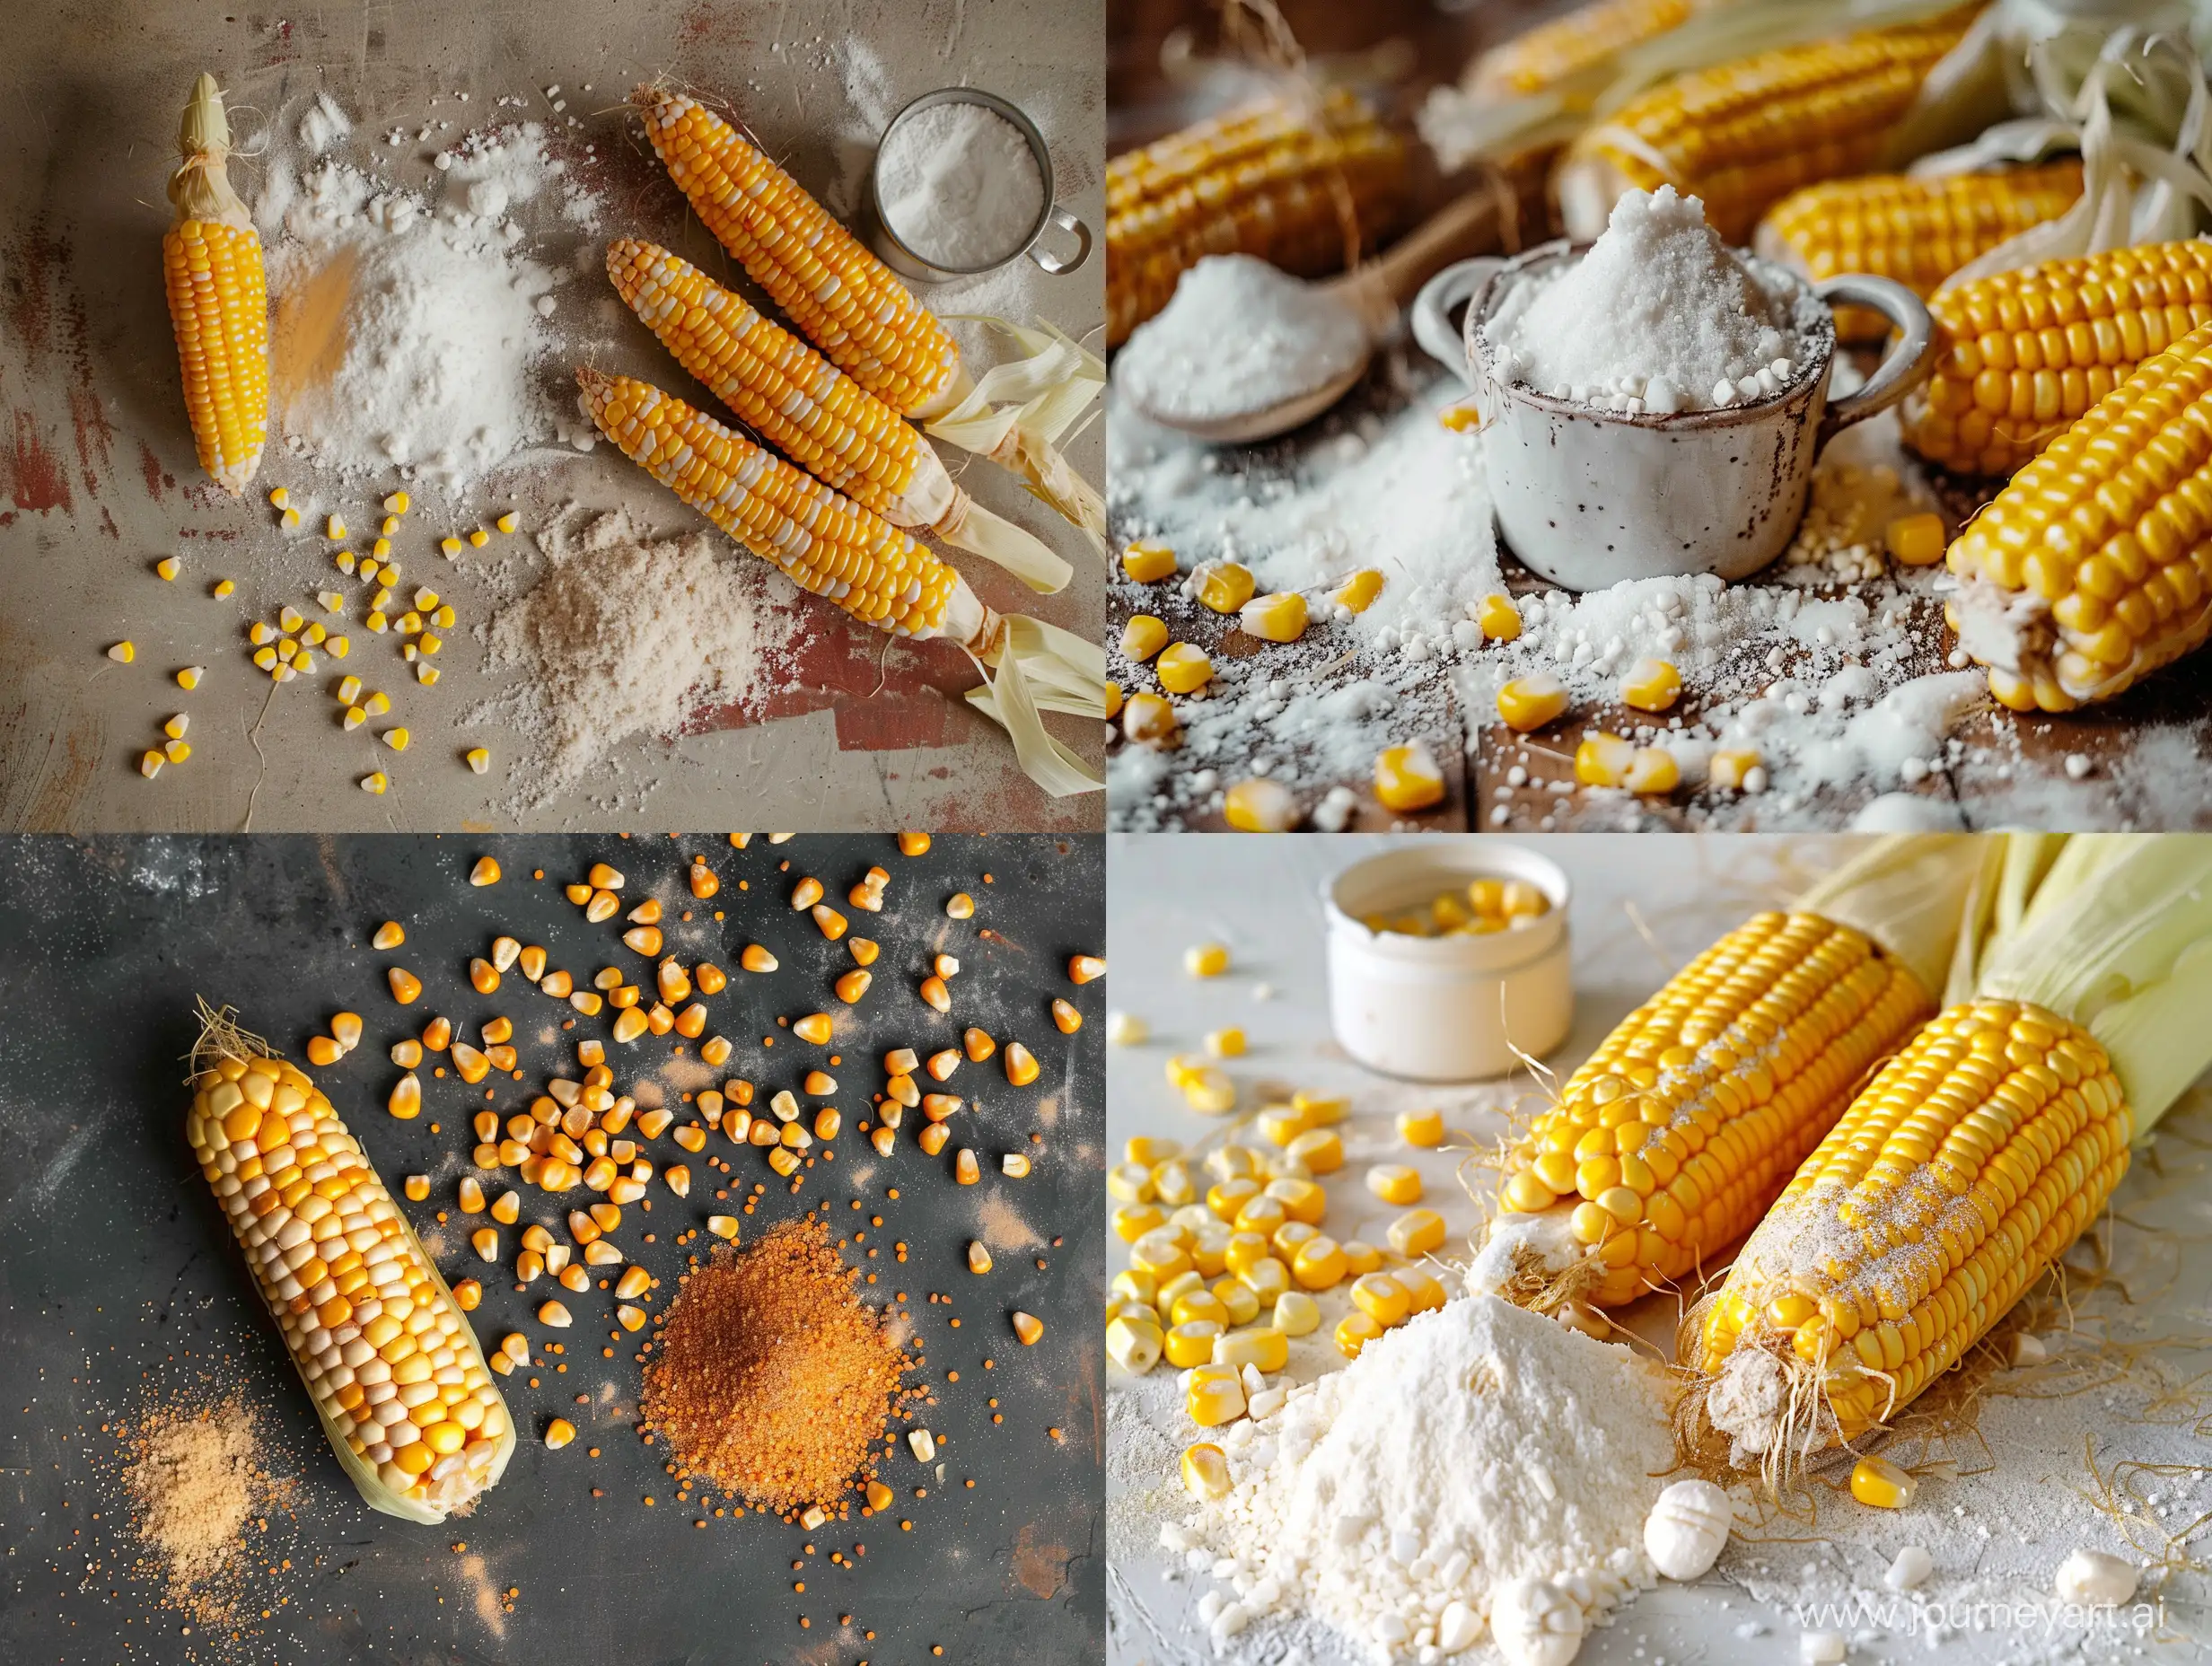 Natural and real photo with natural light of corn and corn starch.